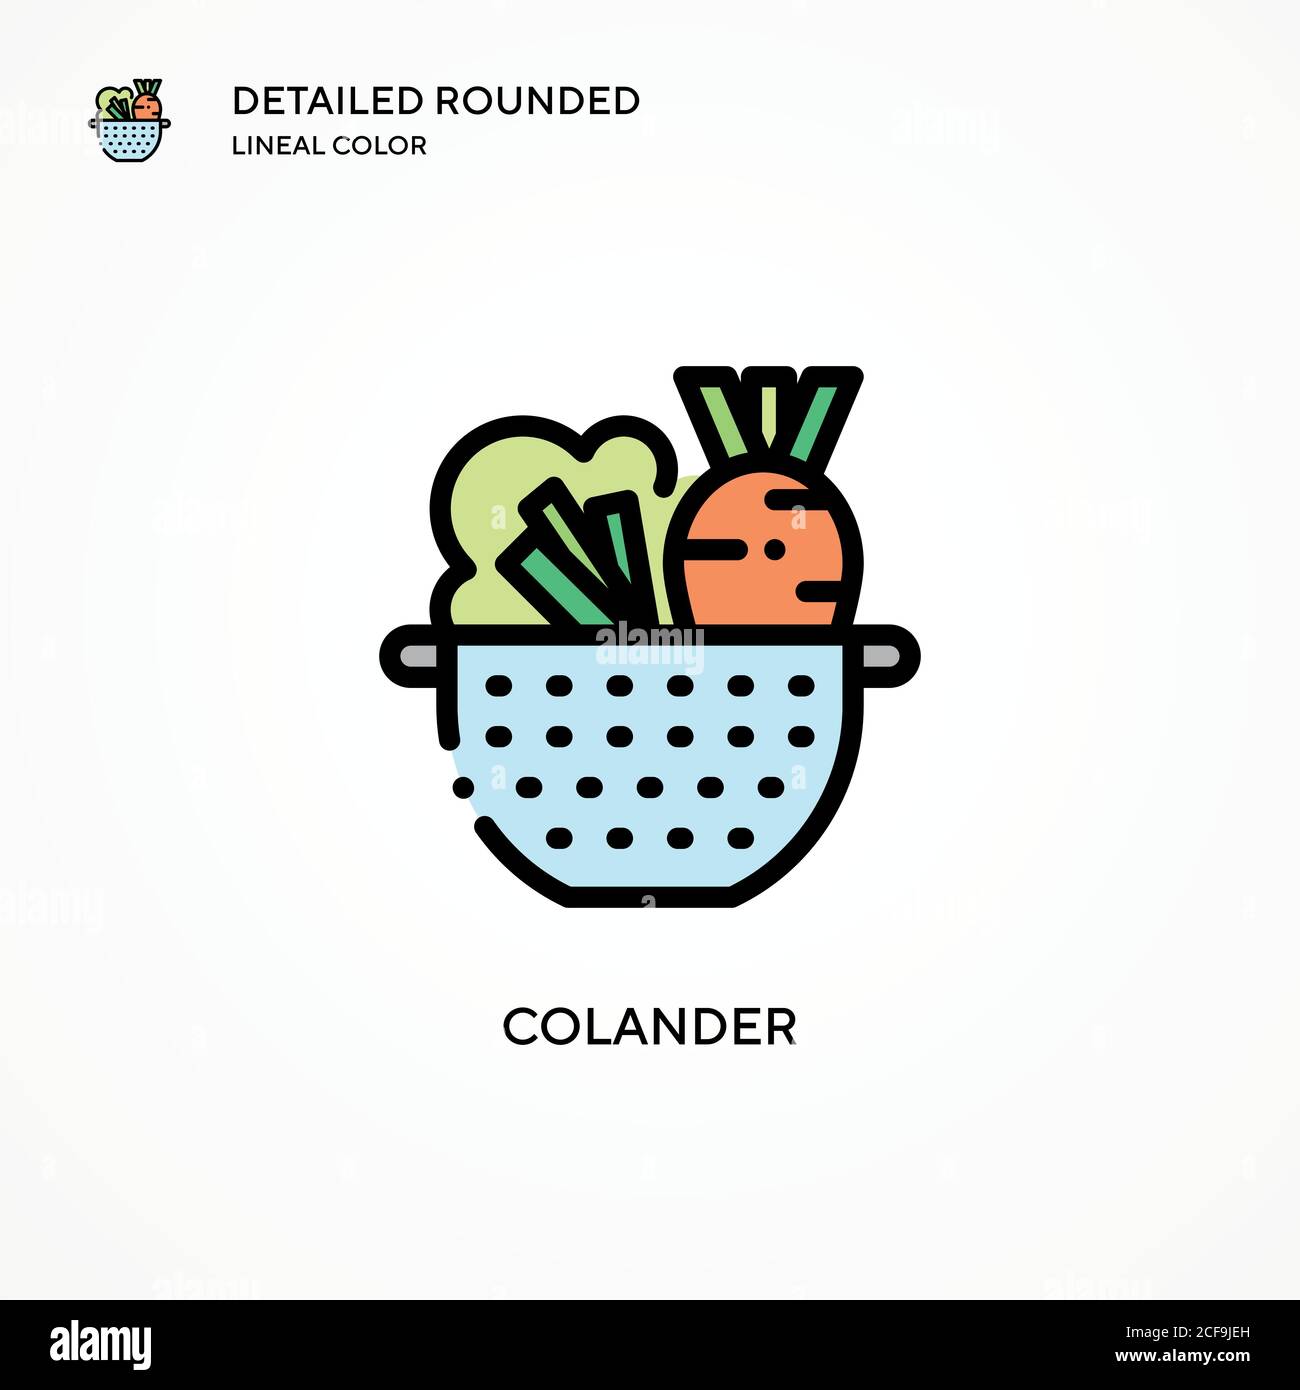 Colander vector icon. Modern vector illustration concepts. Easy to edit and customize. Stock Vector